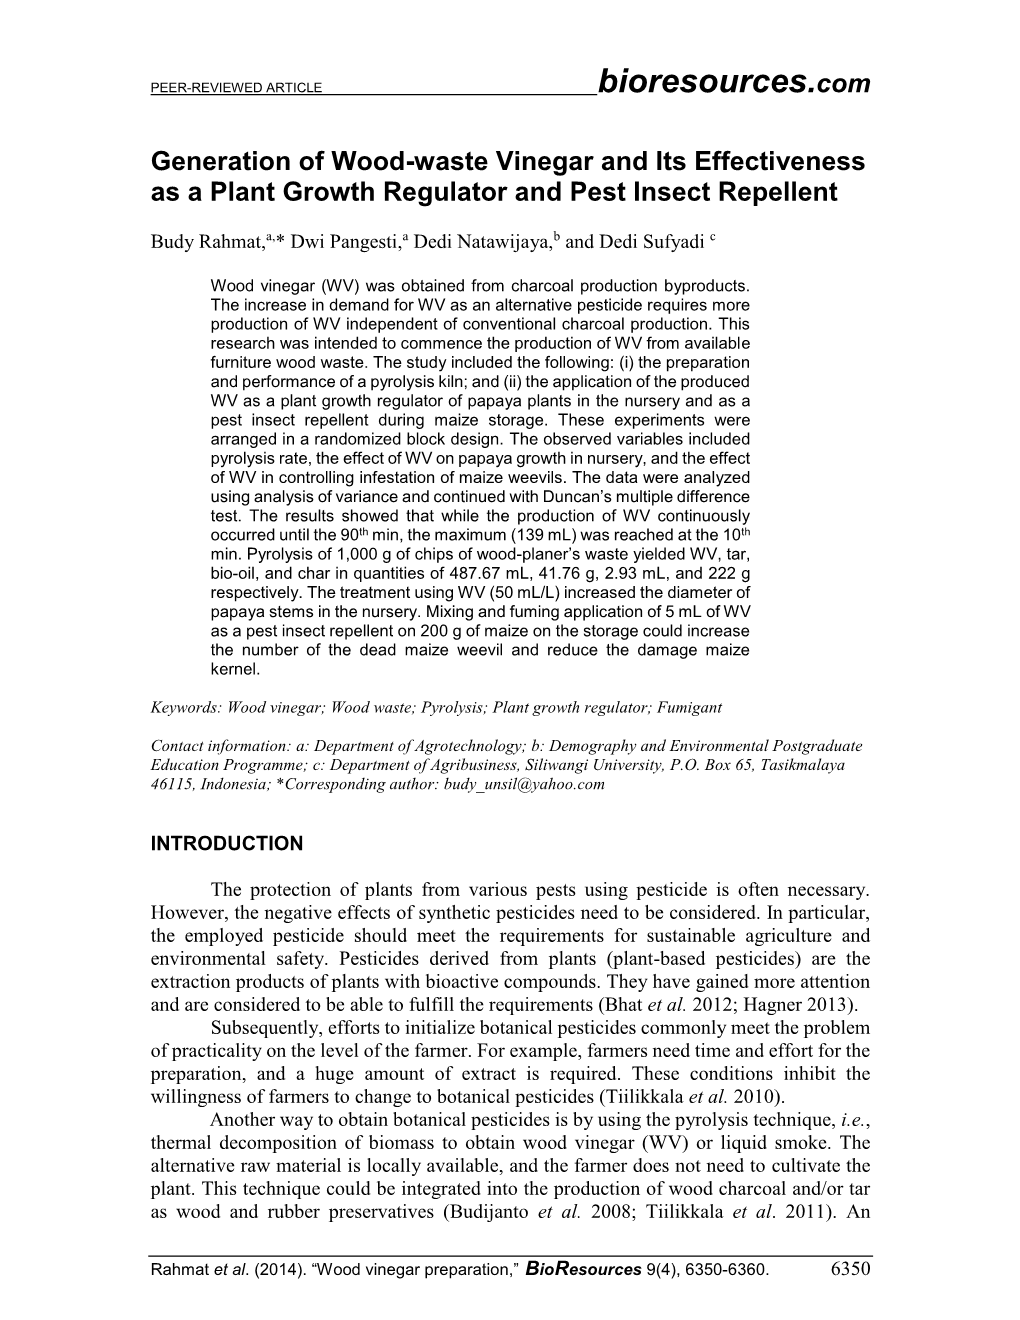 Generation of Wood-Waste Vinegar and Its Effectiveness As a Plant Growth Regulator and Pest Insect Repellent